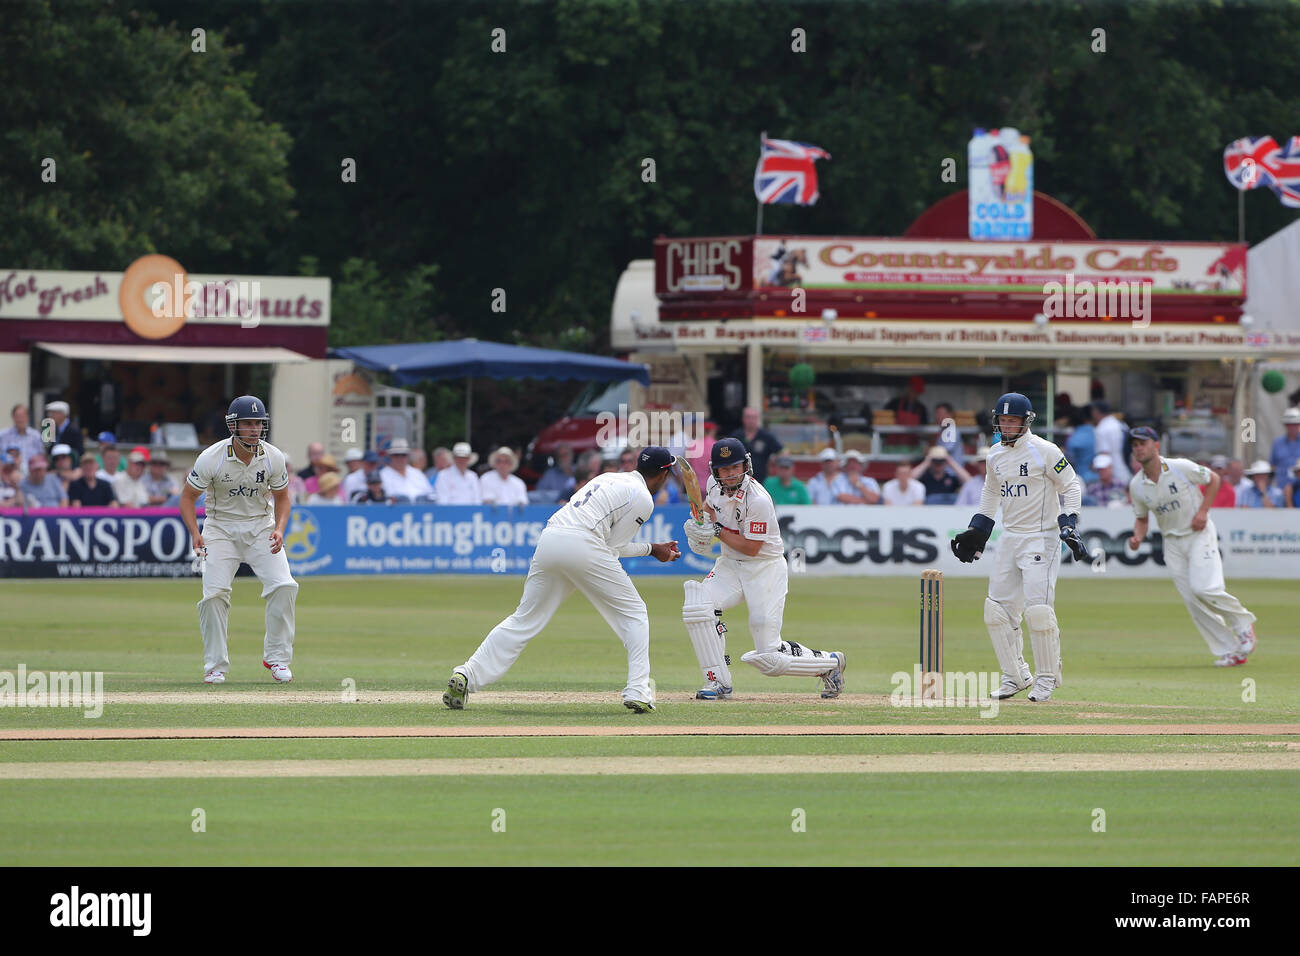 Genaral view of Sussex playing a cricket match at Horsham in West Sussex. Stock Photo